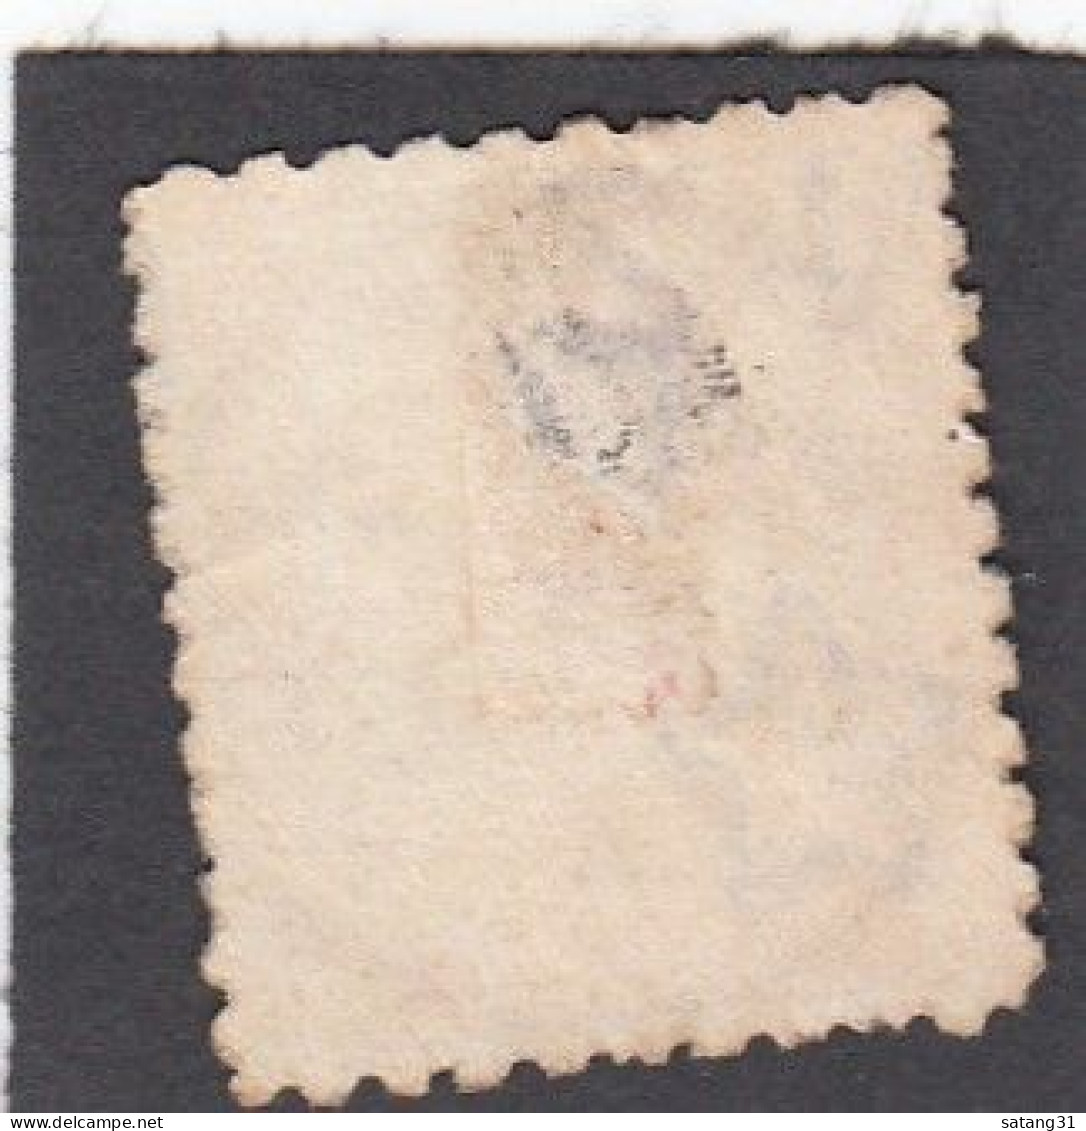 TIMBRE  OBLITERE " N. Z. PAEROA 8 FE 98 ". - Used Stamps